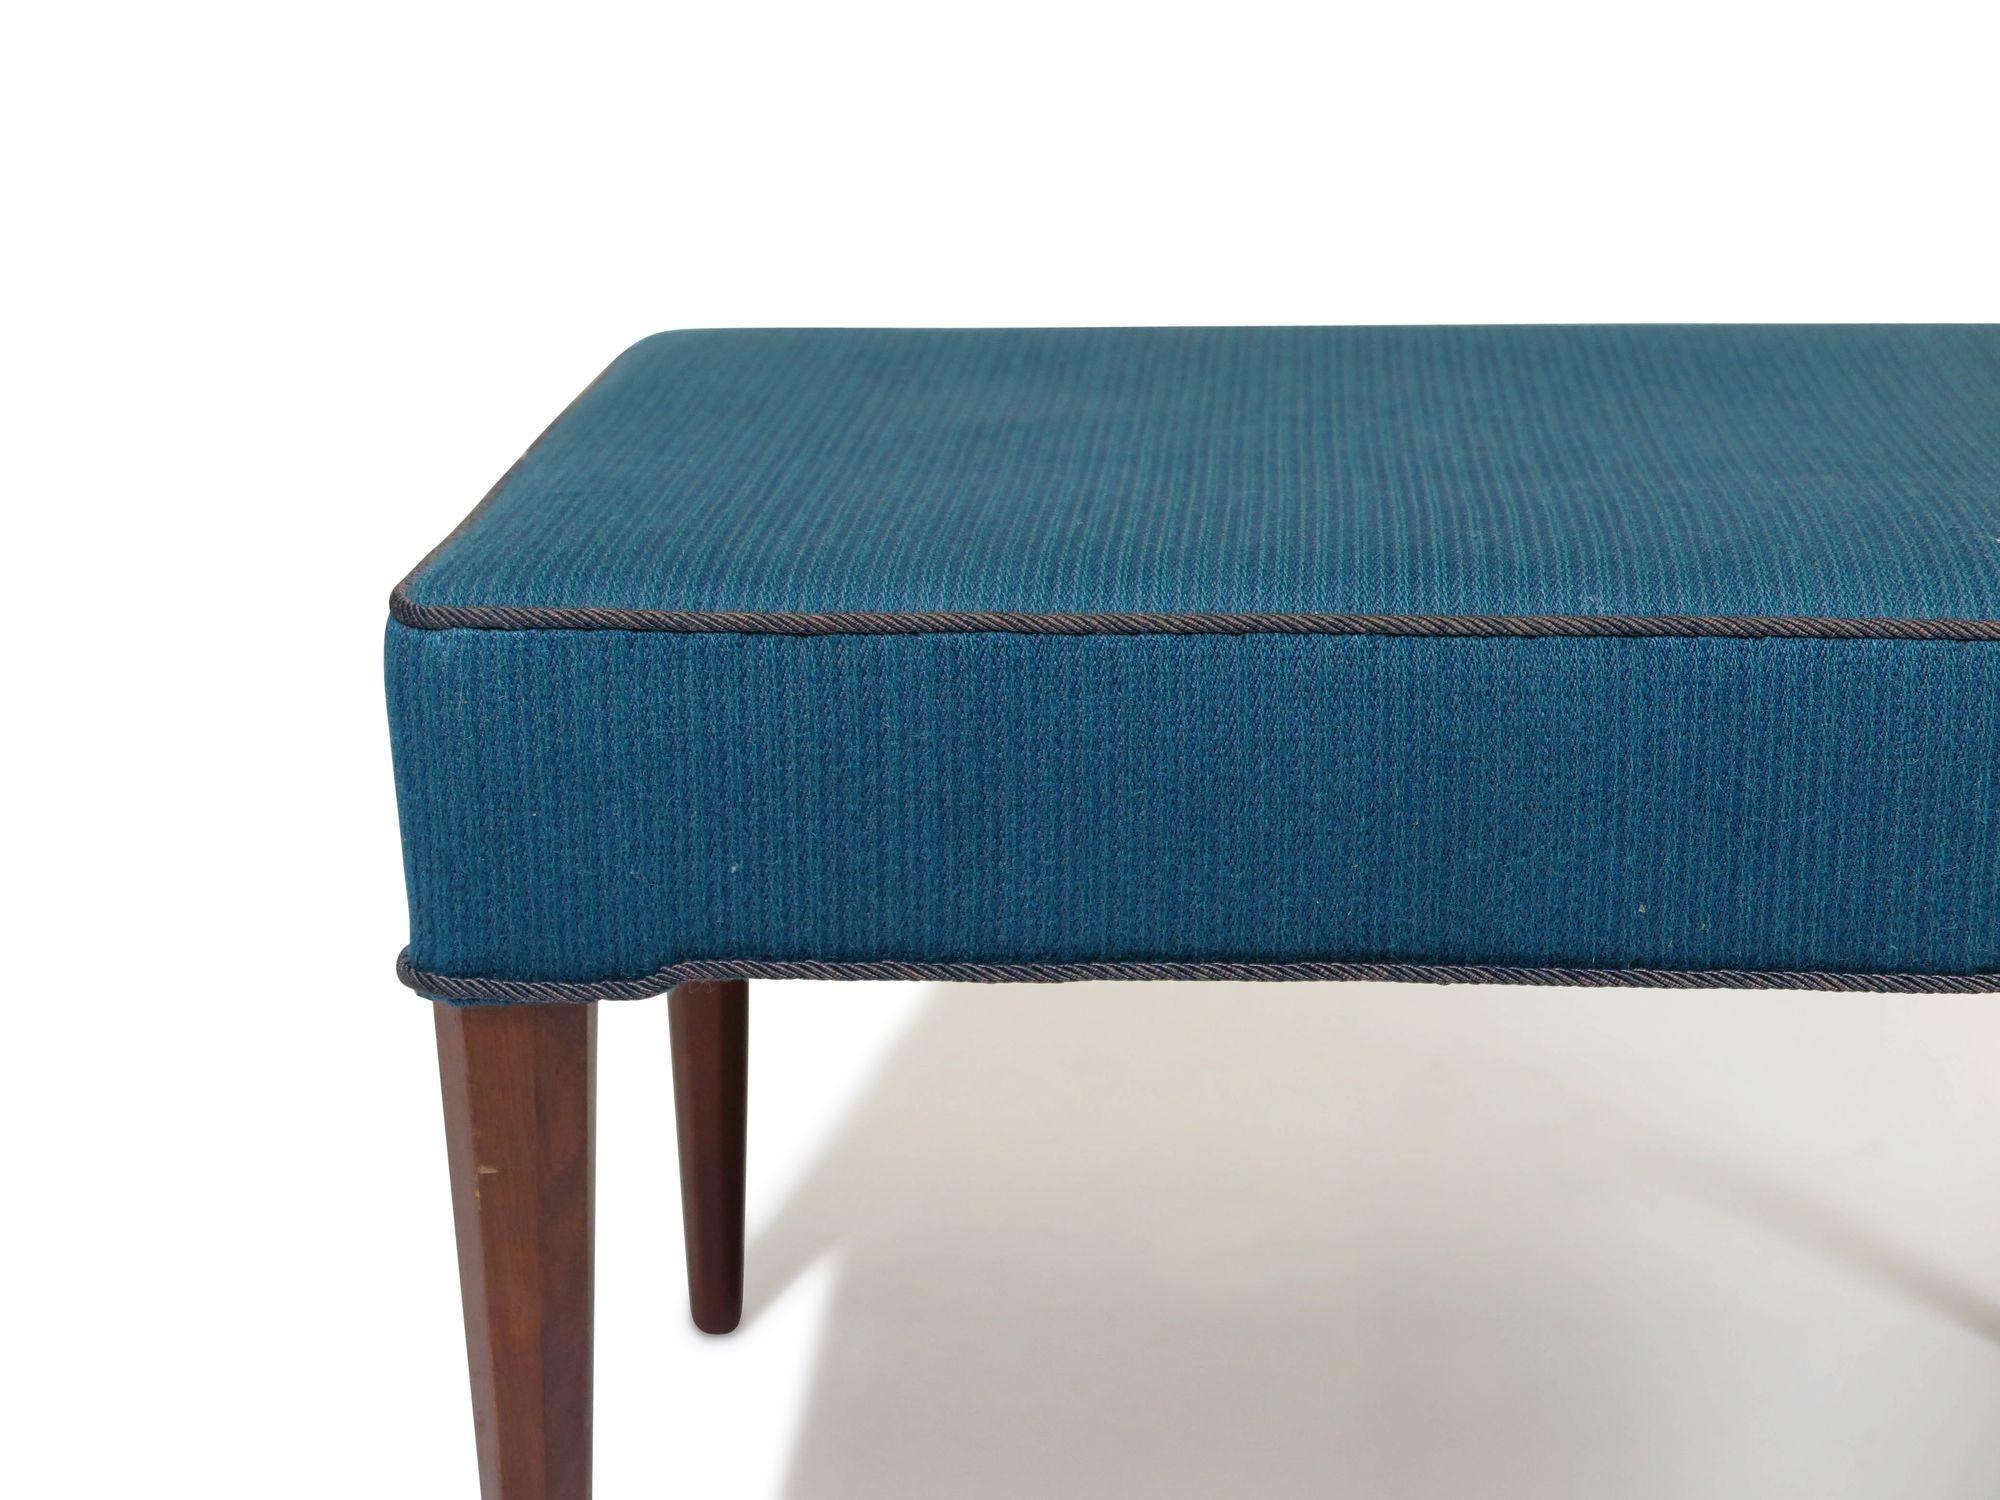 1940s Scandinavian ottoman raised on elegant mahogany legs in the manner of Frits Henningsen. The ottoman is upholstered in the original blue wool fabric and can be used in its current condition or fully upholstered in a material of your